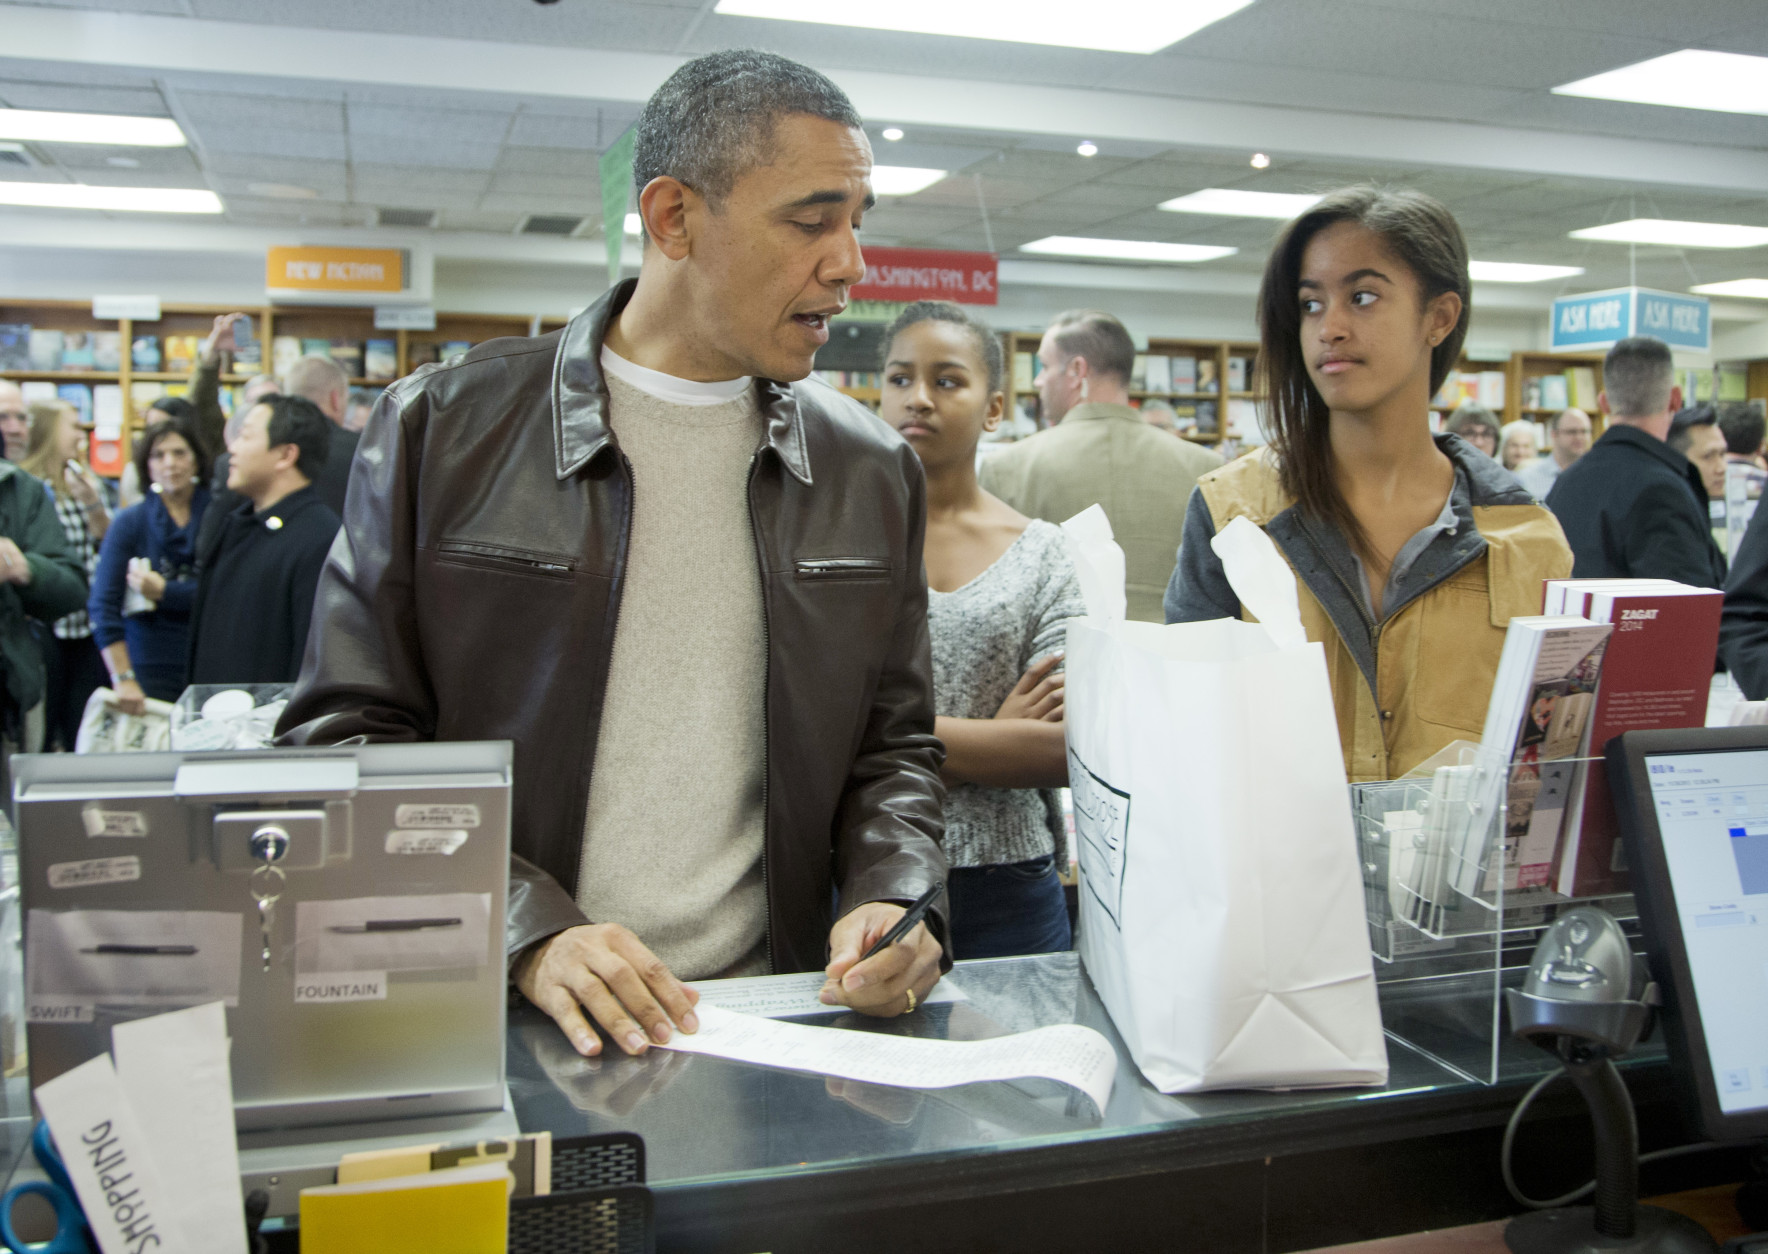 FILE - In this Nov. 30, 2013 file photo, President Barack Obama, with daughters Sasha, center, and Malia, pays for his purchase the the local bookstore Politics and Prose in northwest Washington. President Barack Obamas daughter Malia was just 10 and longing for a promised puppy when her family moved into the White House. Shes marked some of lifes milestones in the past seven years, and another one comes Friday: graduation from high school.  (AP Photo/Manuel Balce Ceneta, File)